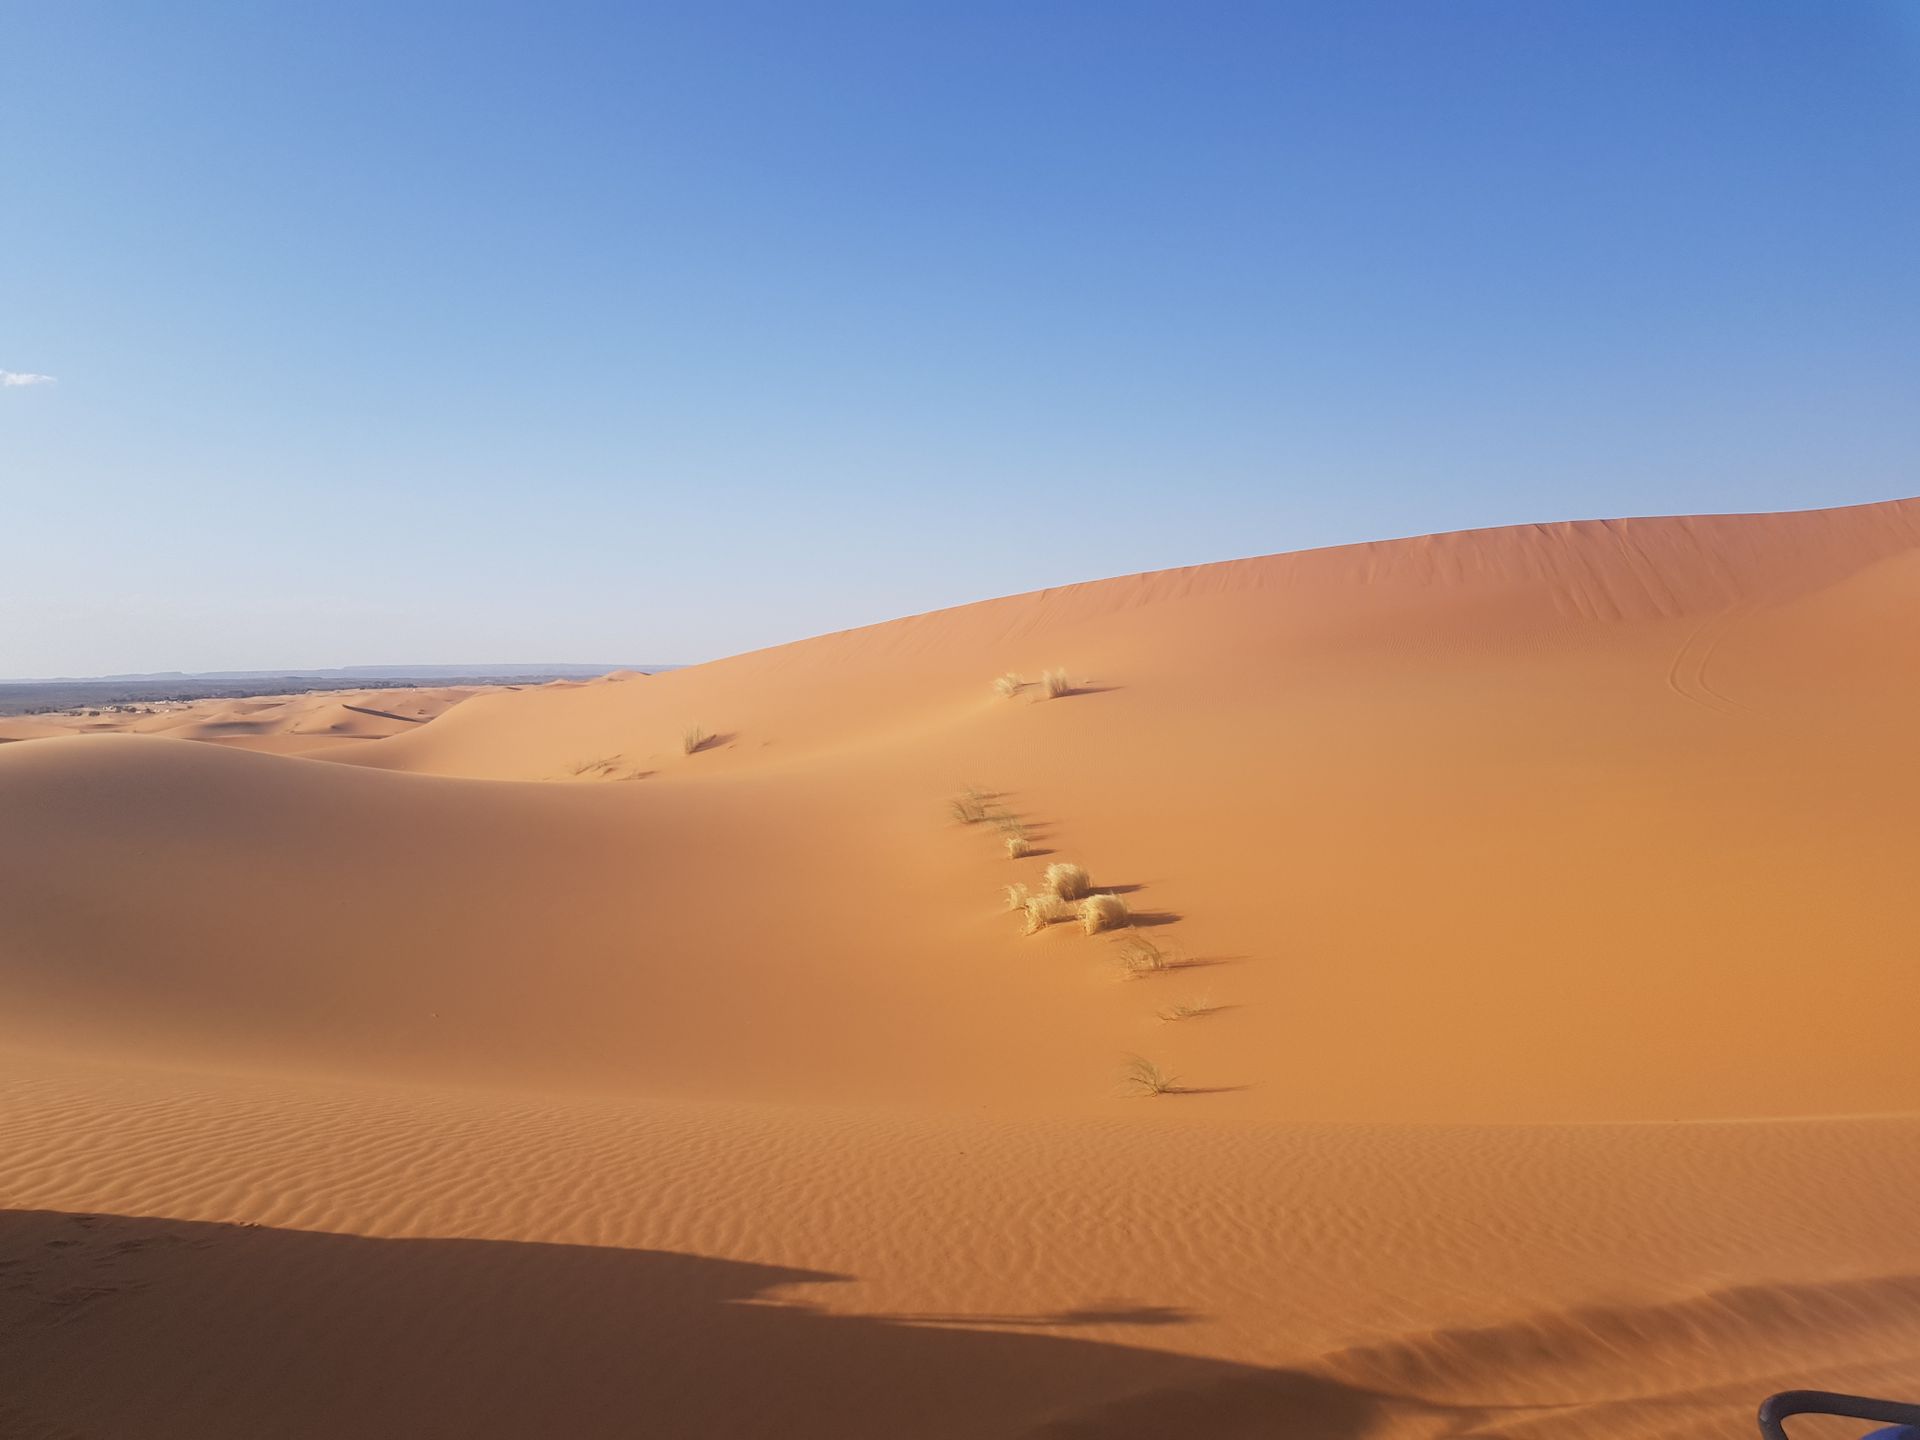 One of the countless dunes of the Sahara